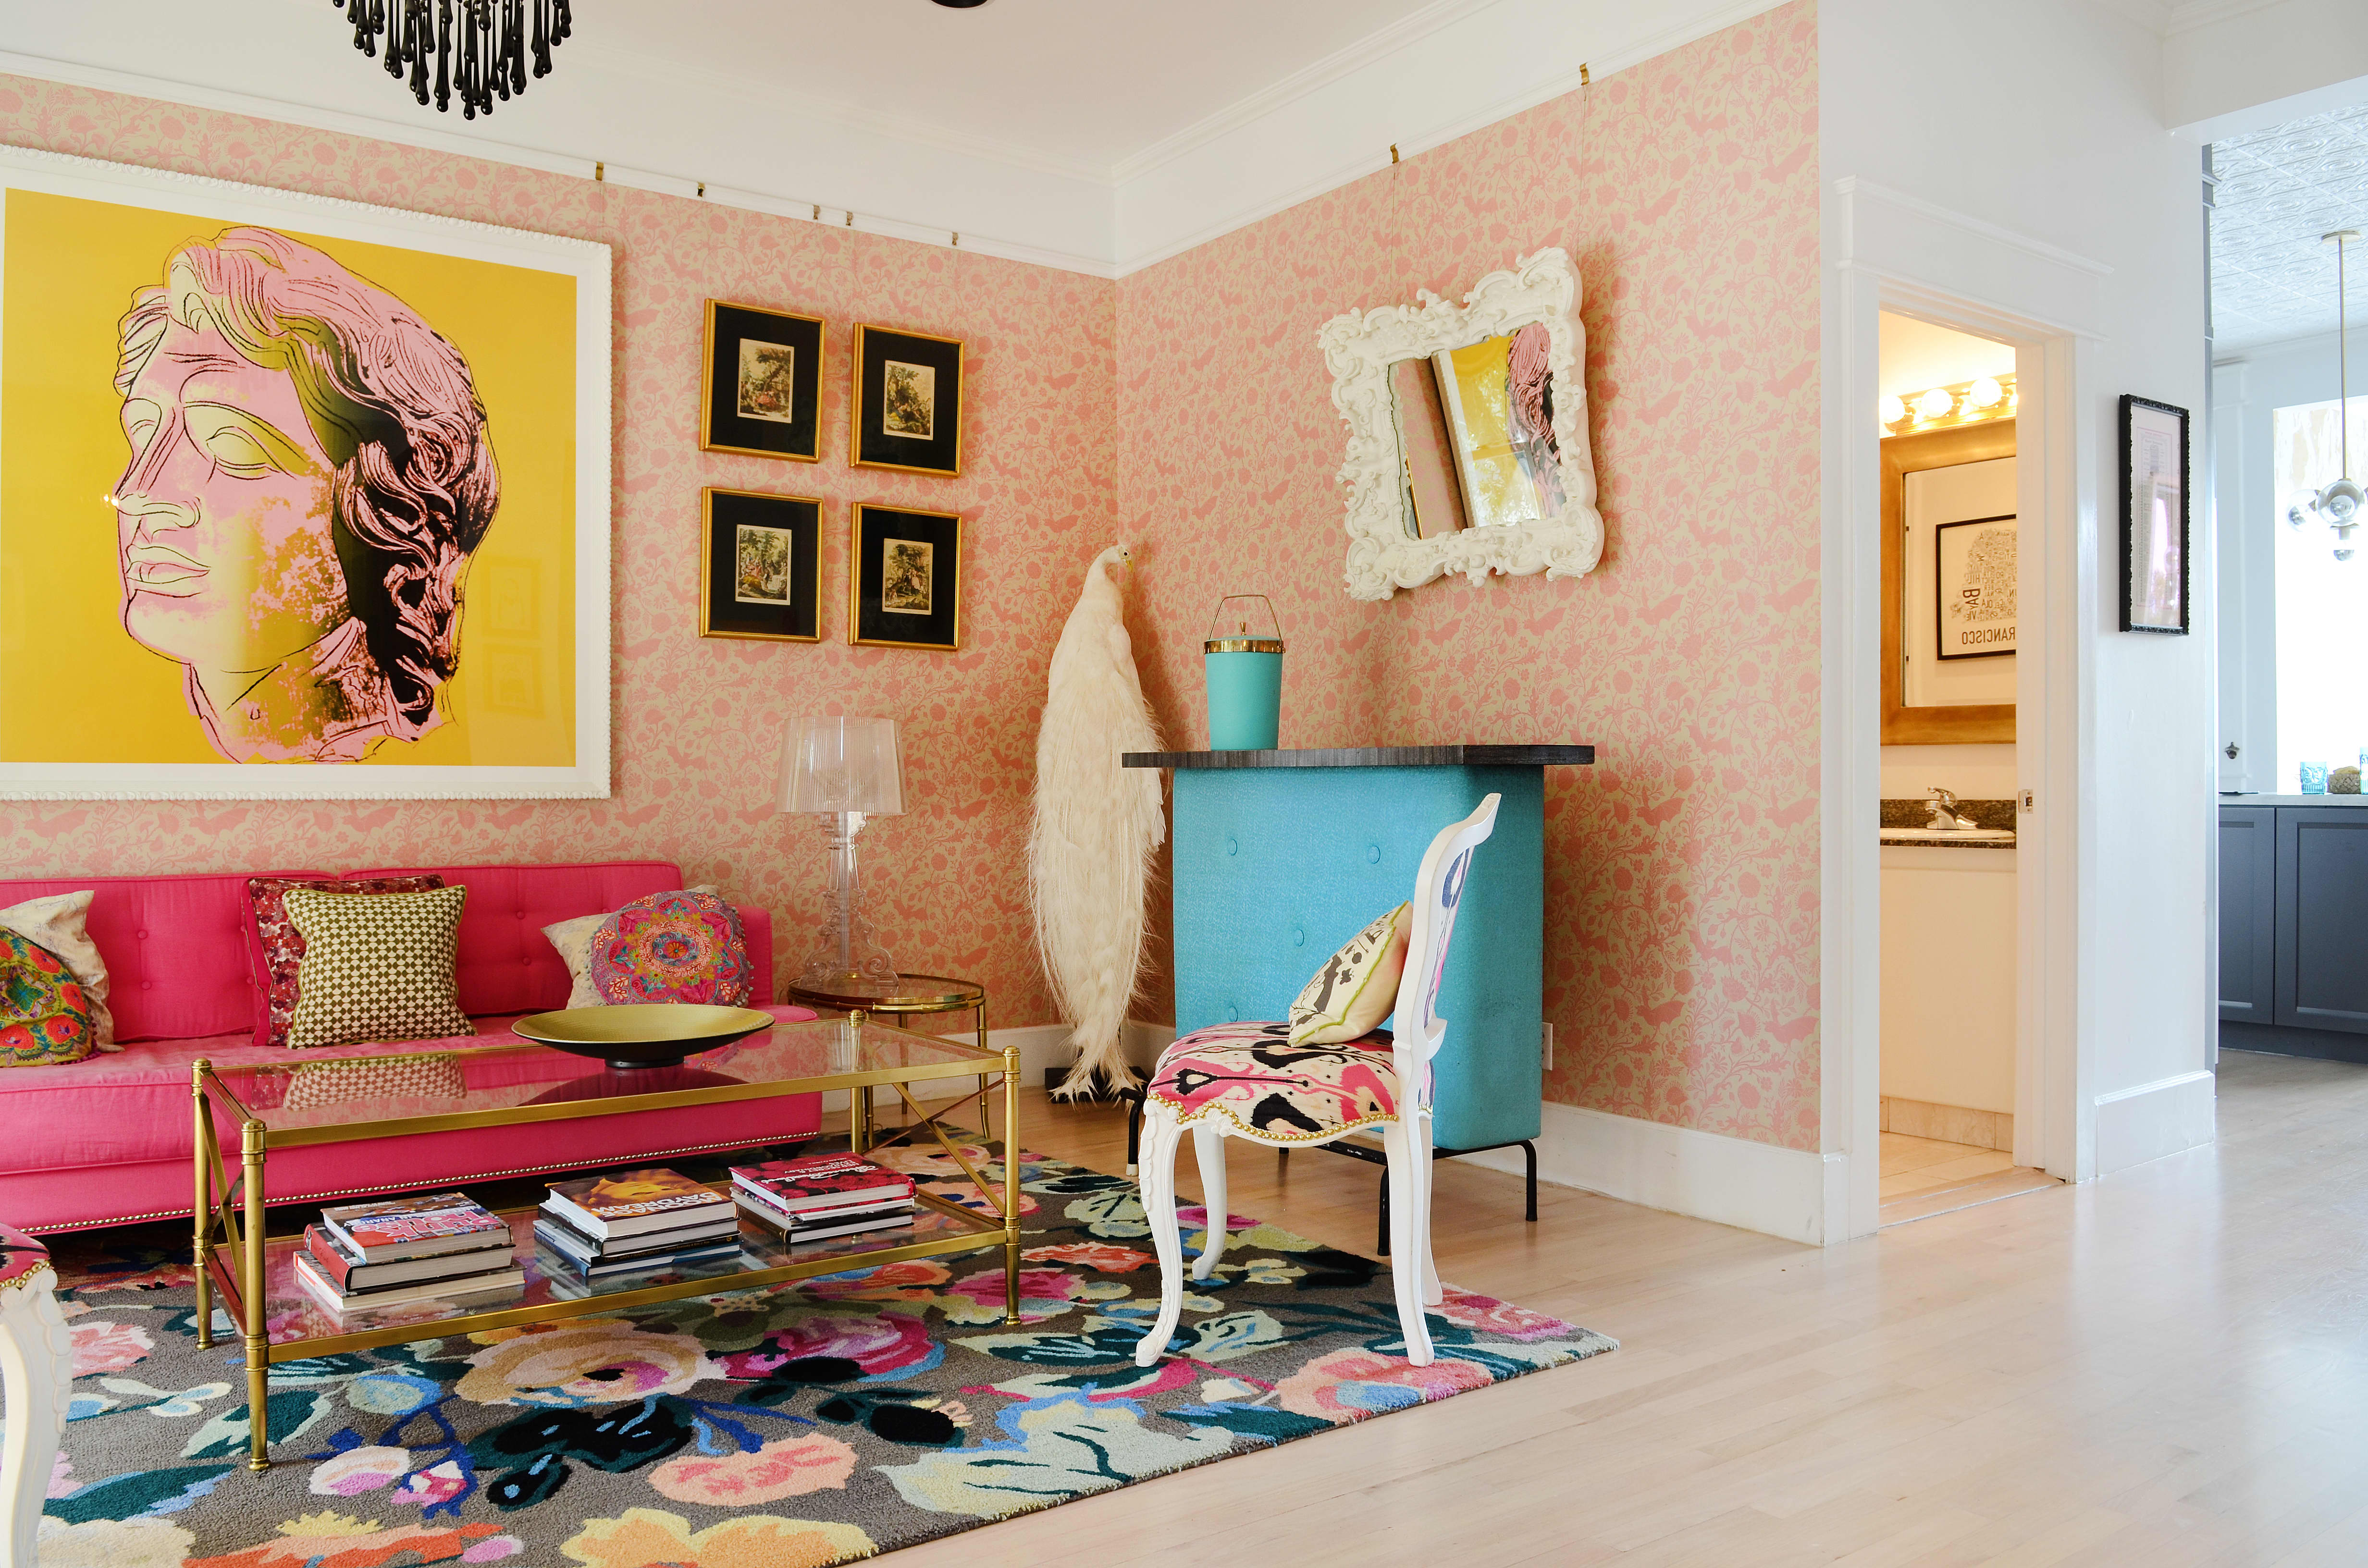 This Colorful San Francisco House Is Like a “Victorian on Acid ...